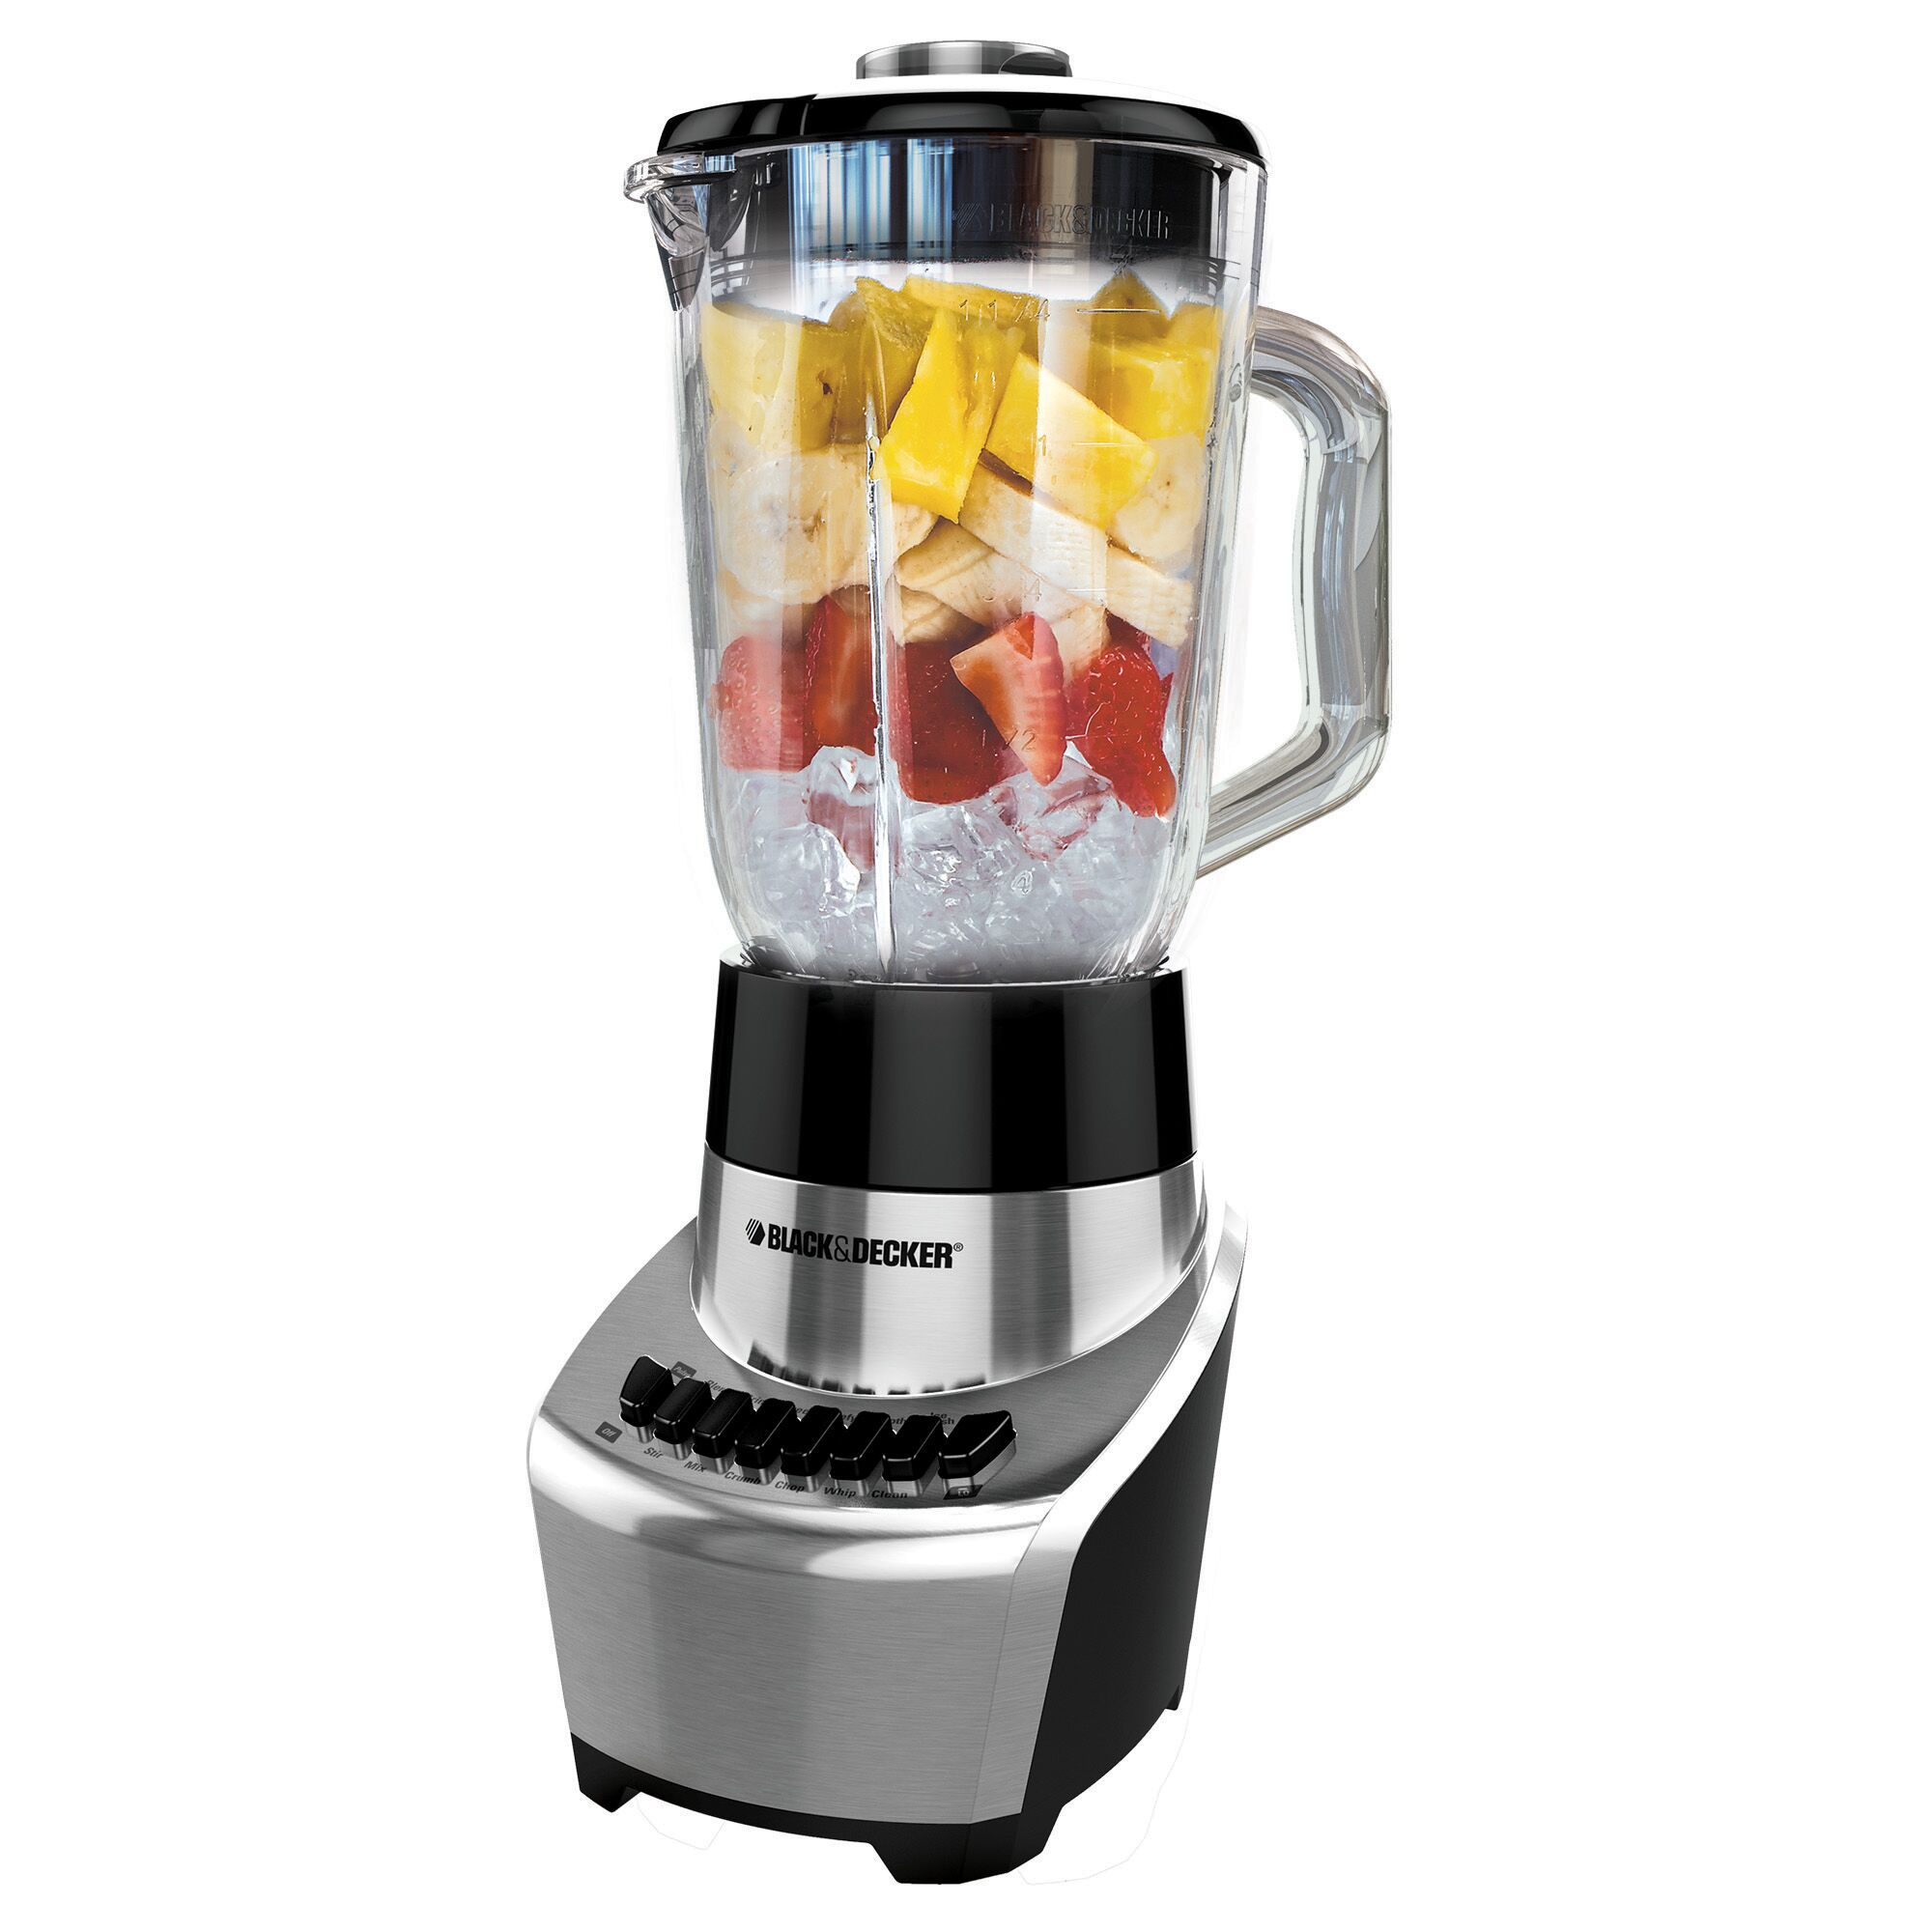 Profile of 12 speed fusion blade blender.